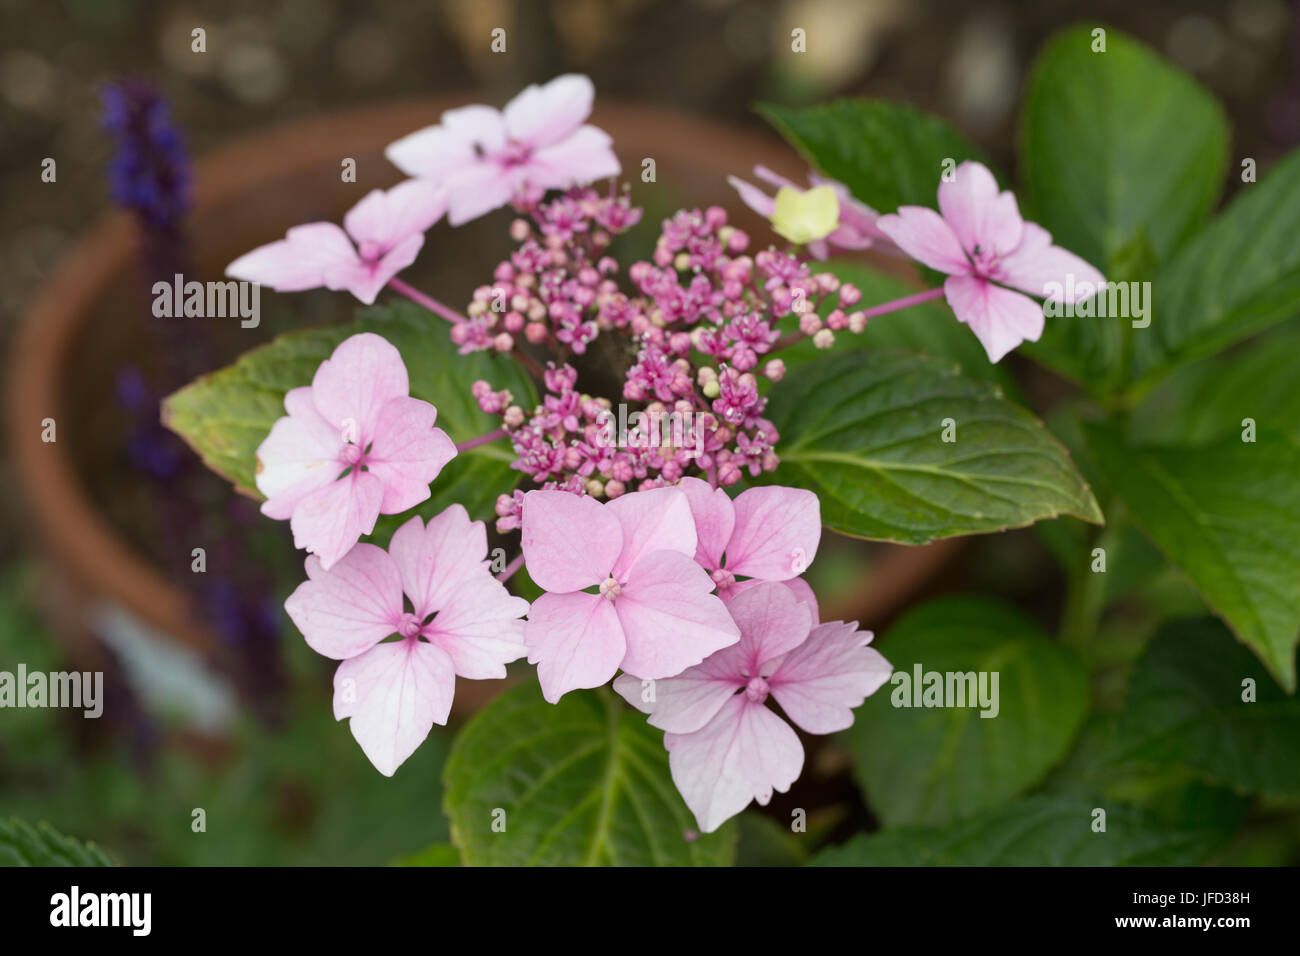 Lace cap hydrangea flower head emerging on a container-grown plant Stock Photo